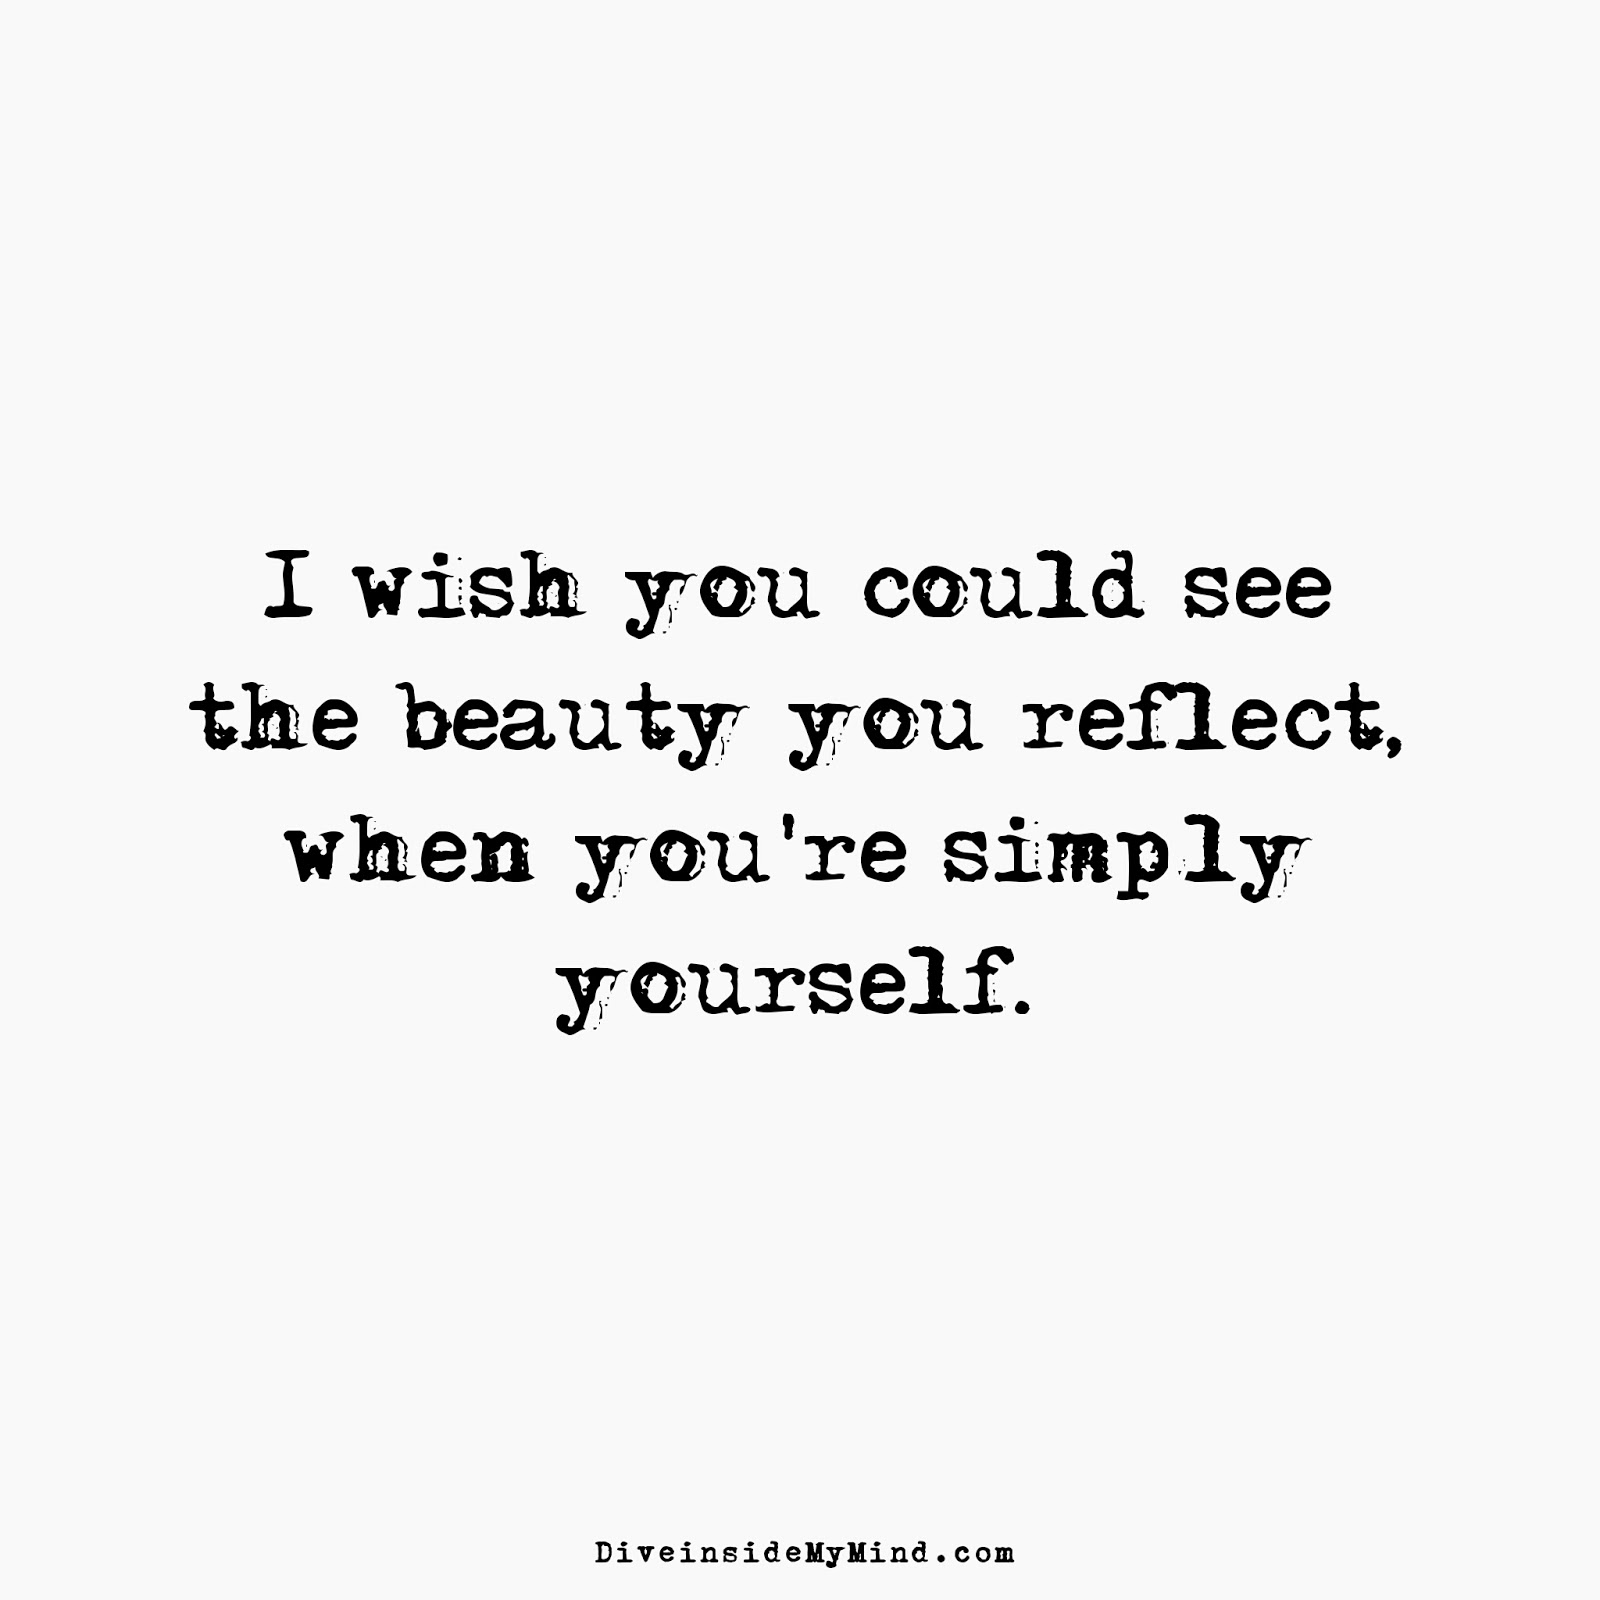 i wish you could see the beauty you reflect when you’re simply yourself